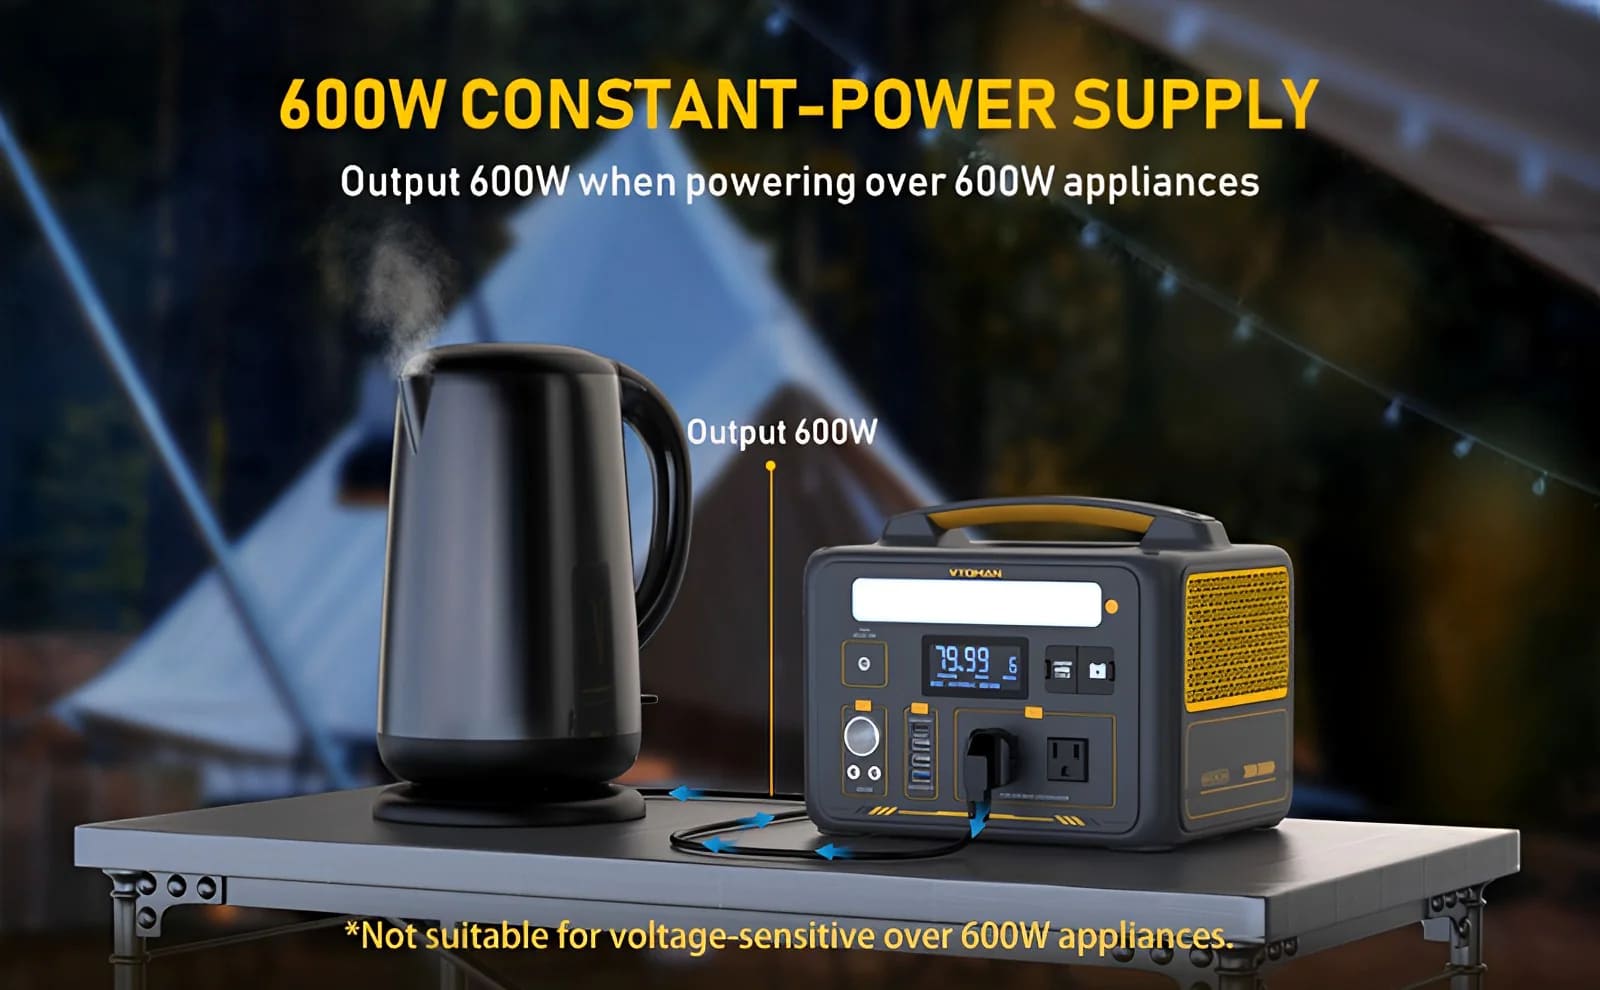 VTOMAN Jump 600X power station has 2 AC outlets with a rated 600W(surge 1200W) output power